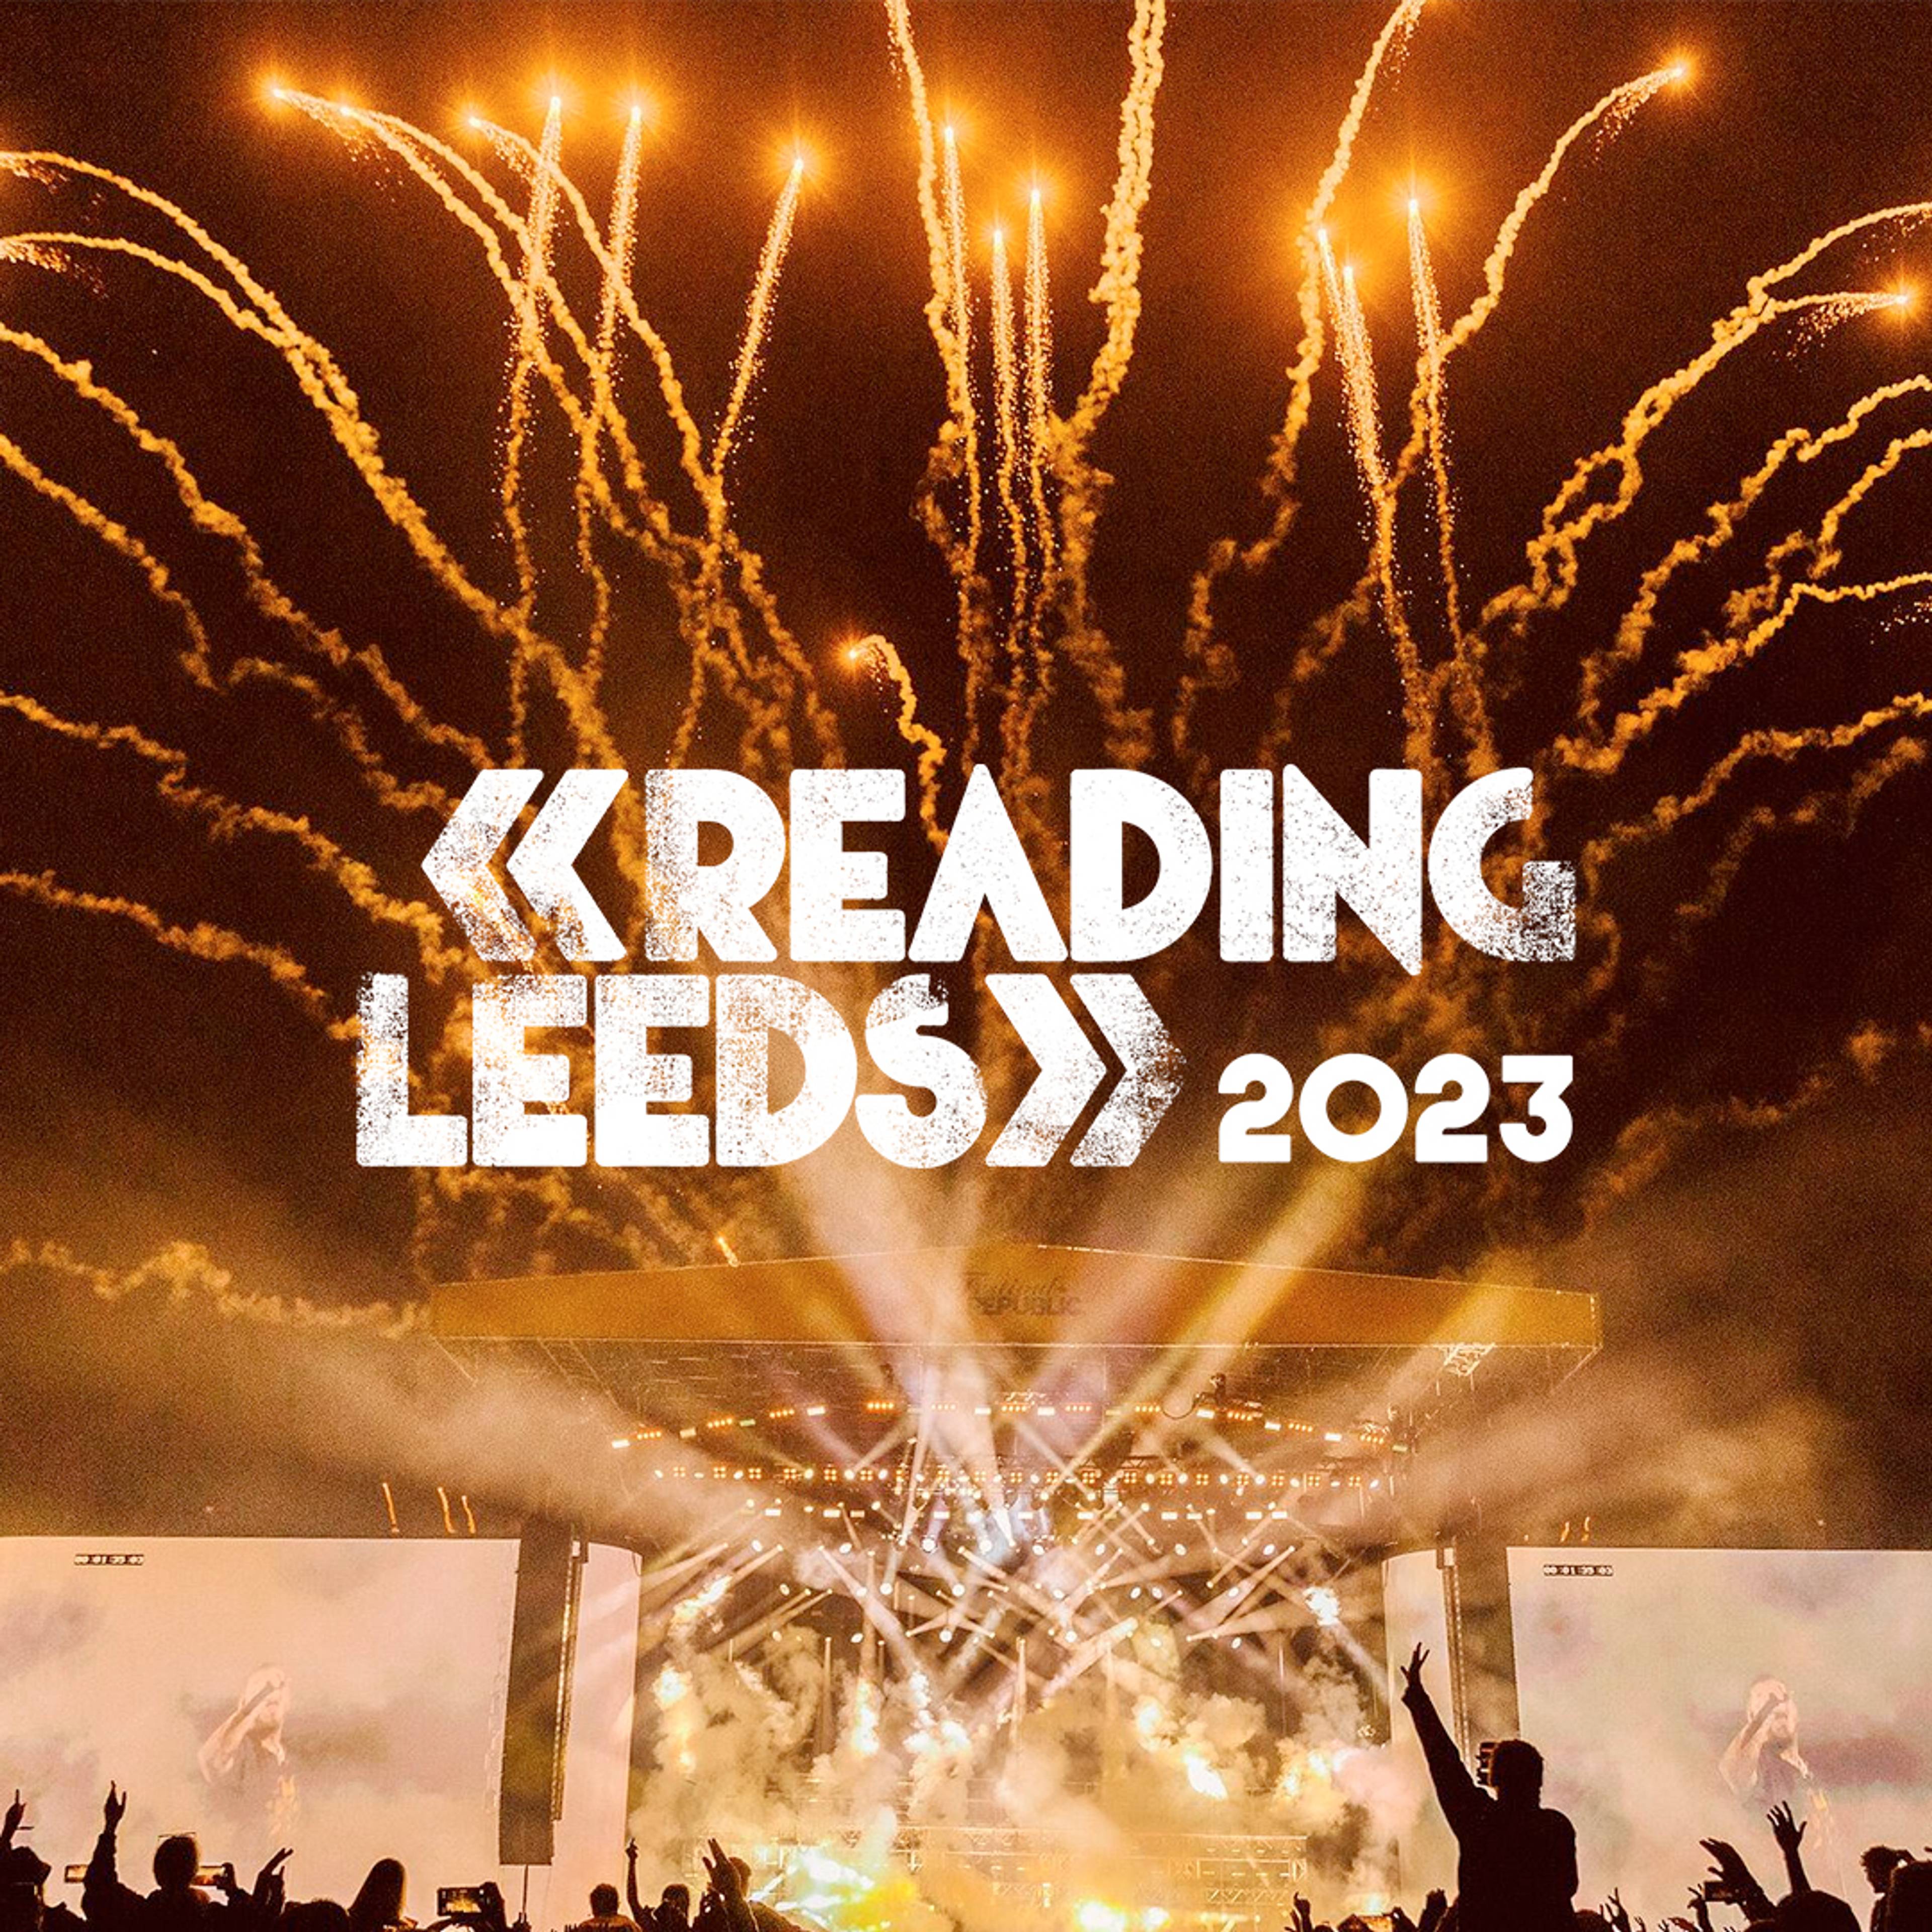 Festival stage at night with fireworks behind the Reading and Leeds 2023 logo